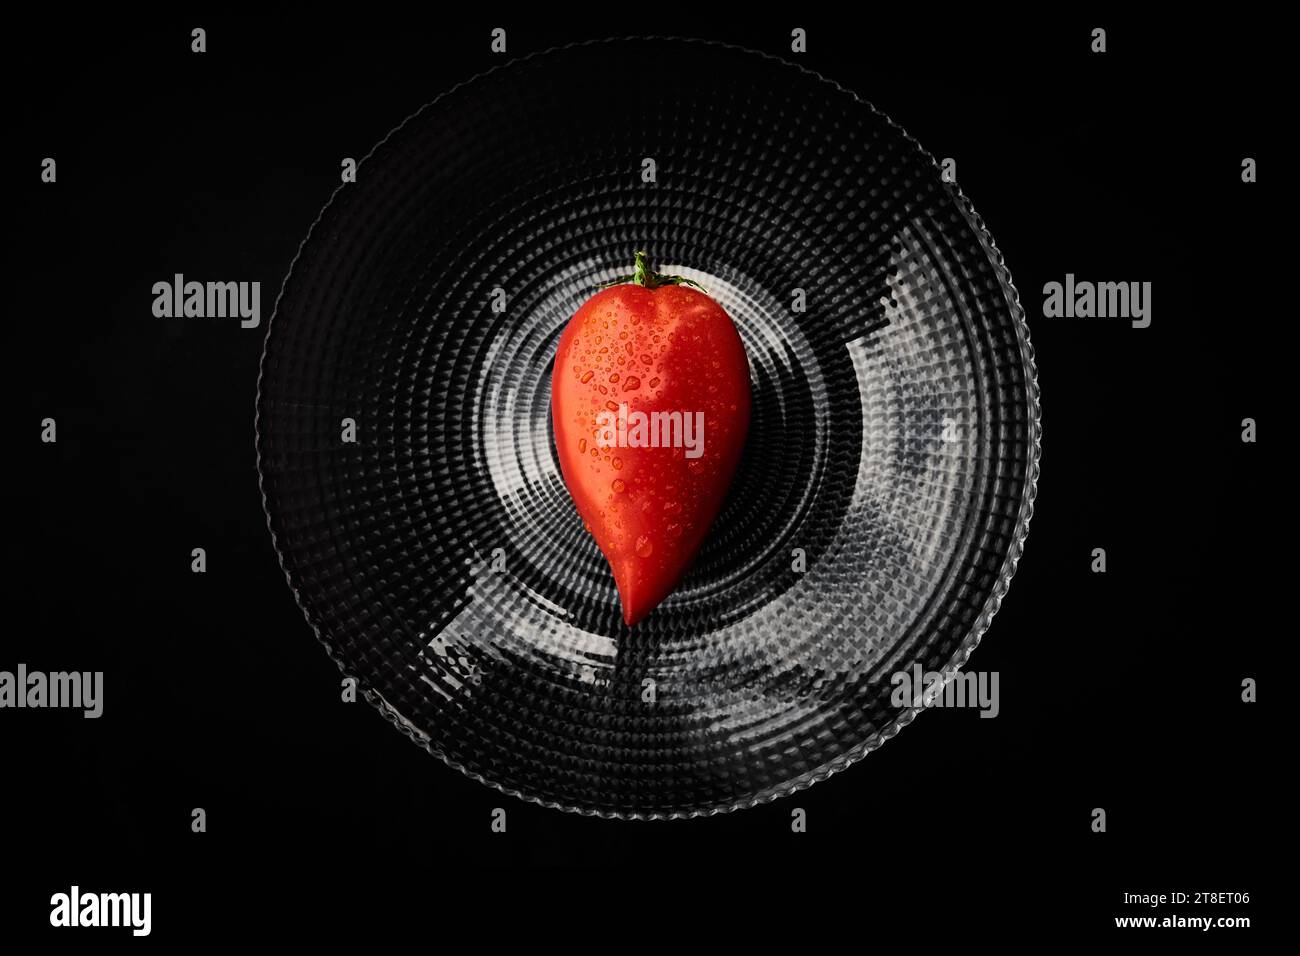 Top view of a wet single tomato on a round, transparent plate with a black background, resembling a heart. Stock Photo